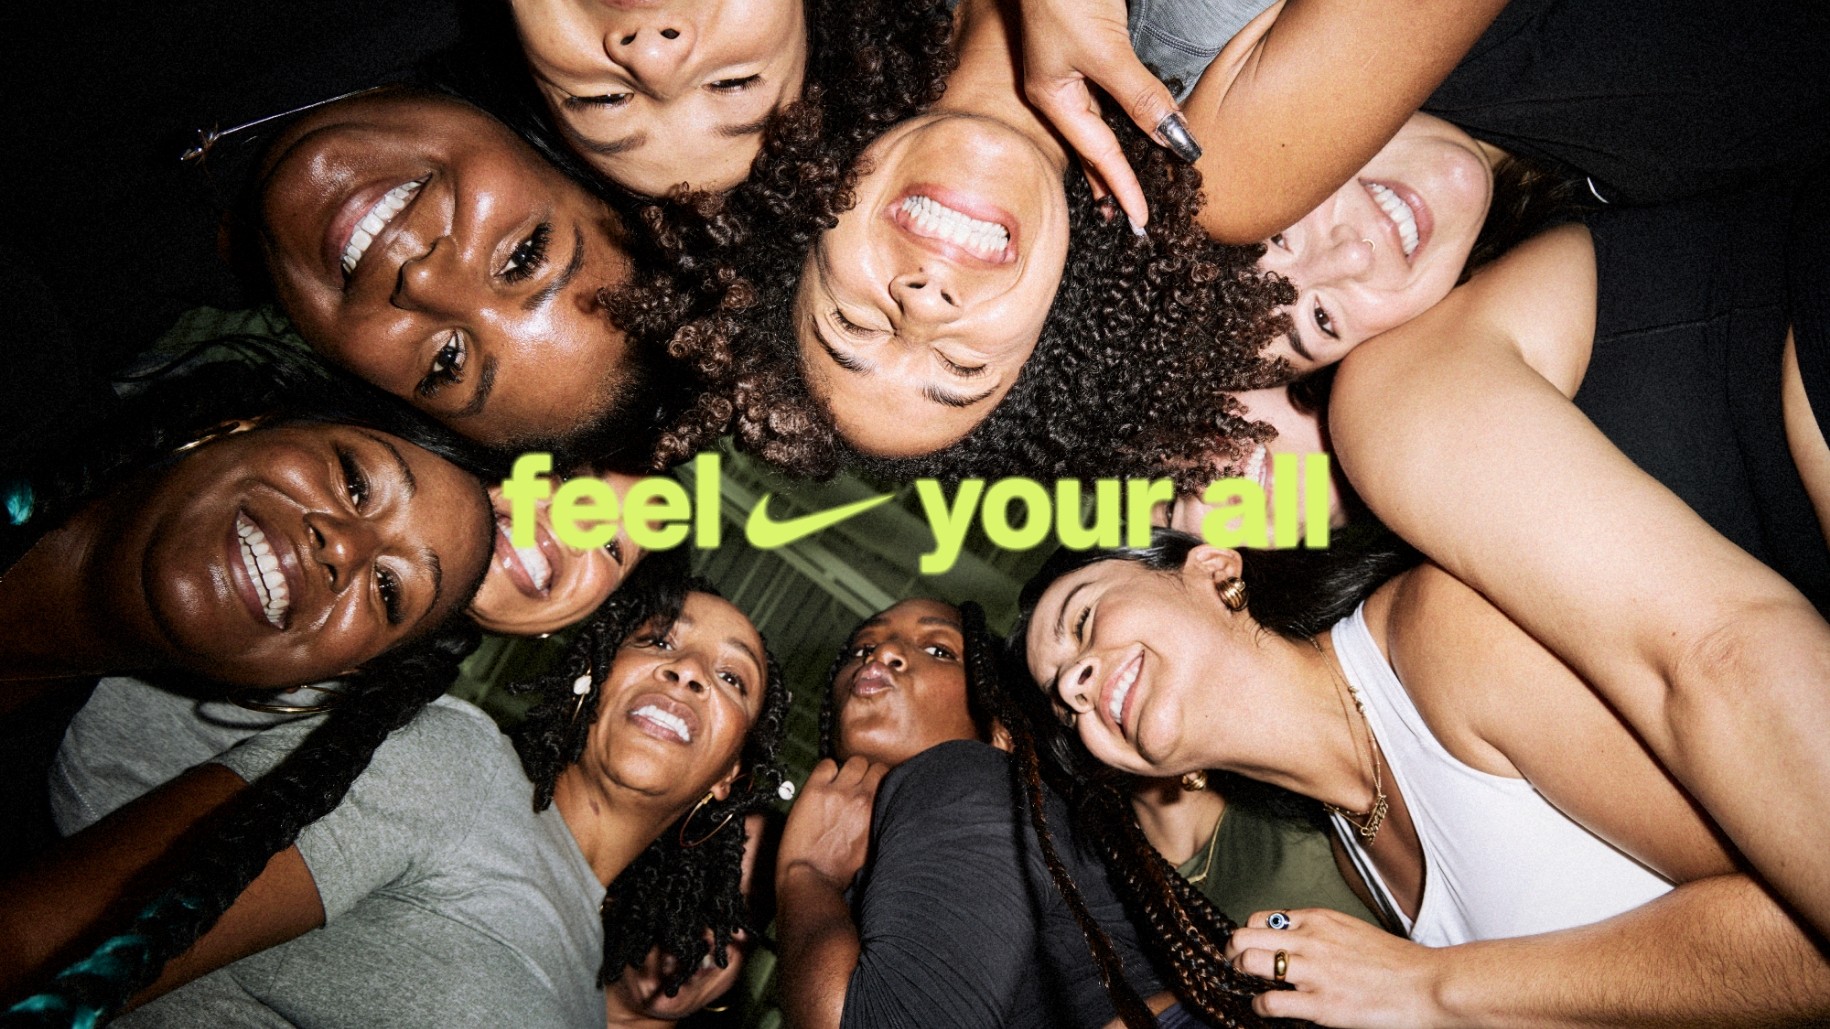 Group of 12 women in circle looking down at camera laughing and posing. feel your all text nike swoosh